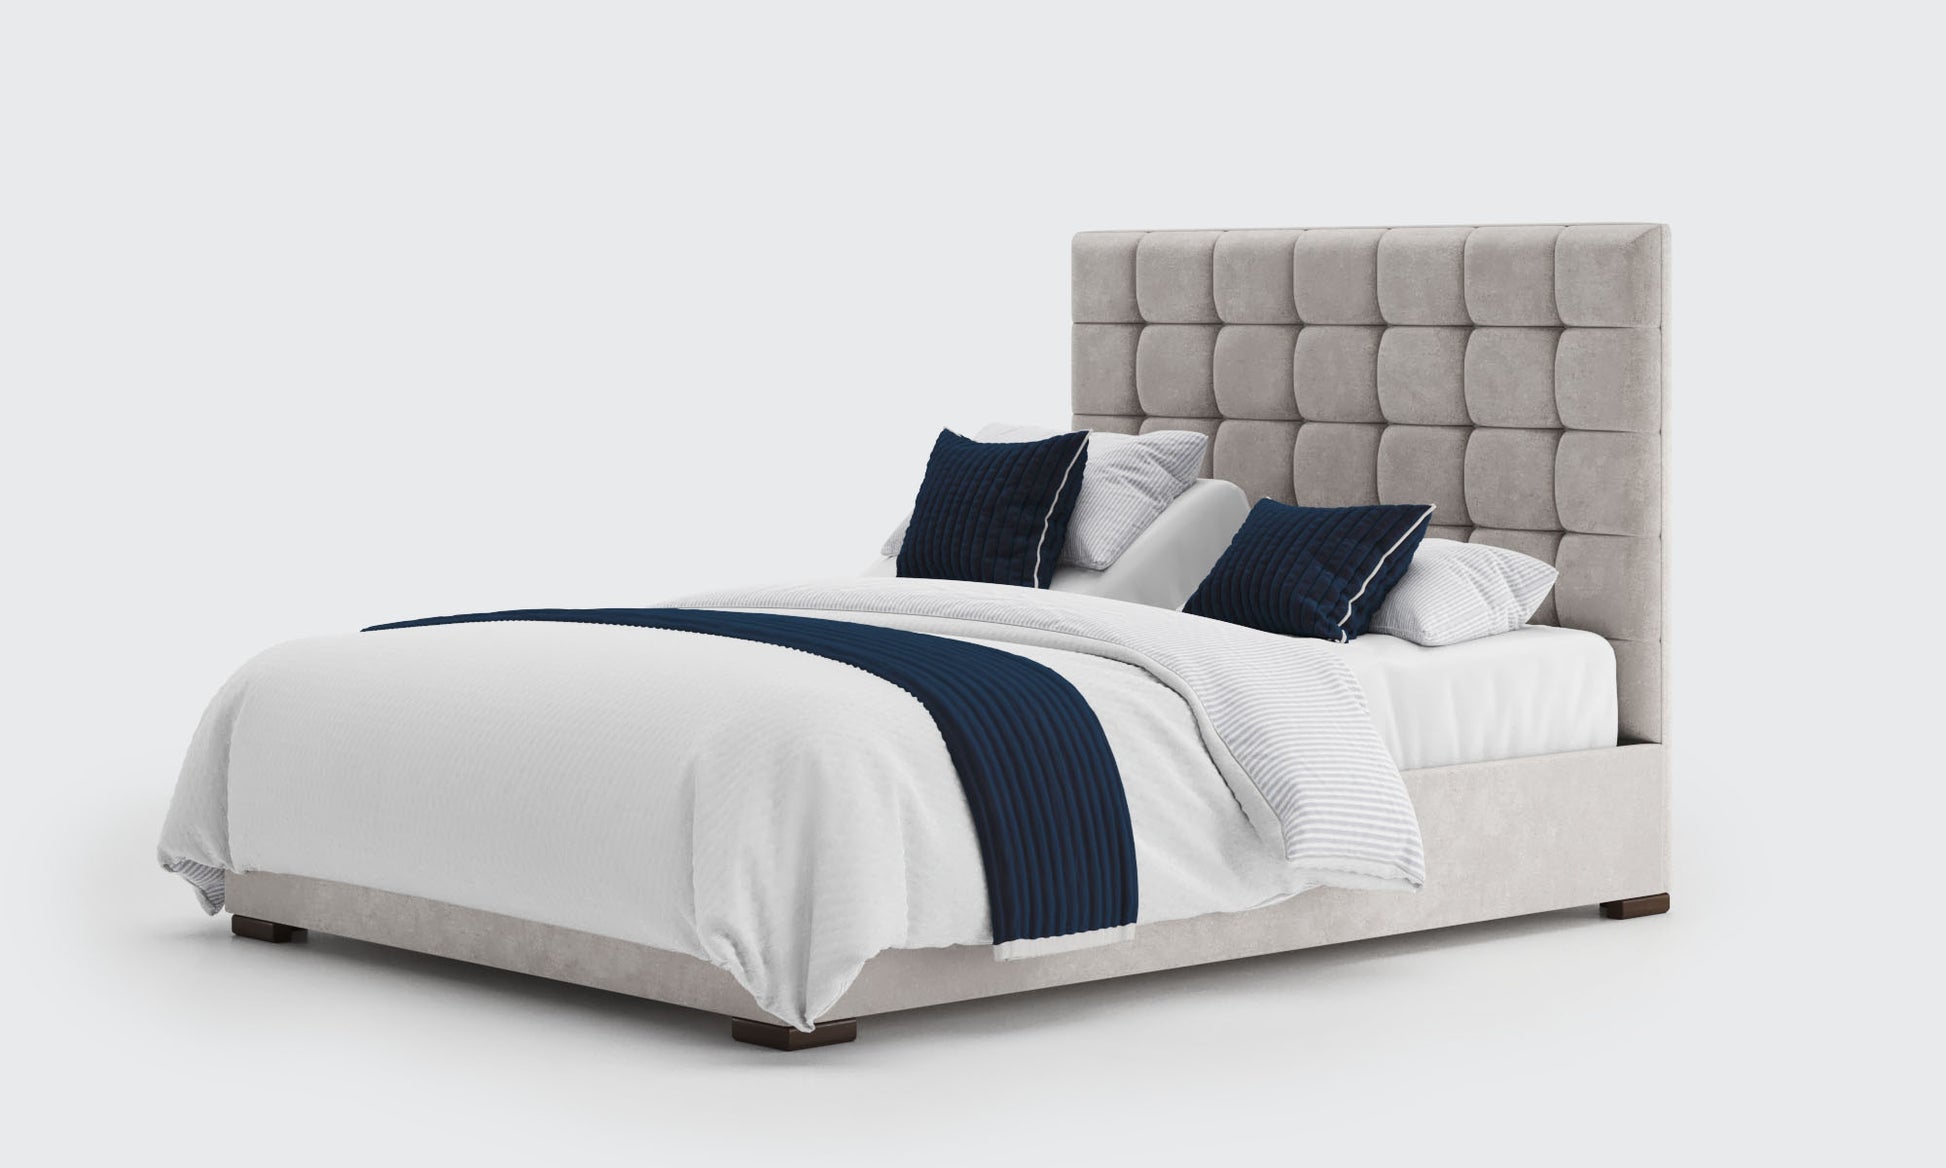 stratton 5ft king dual bed and mattresses in the cream velvet material